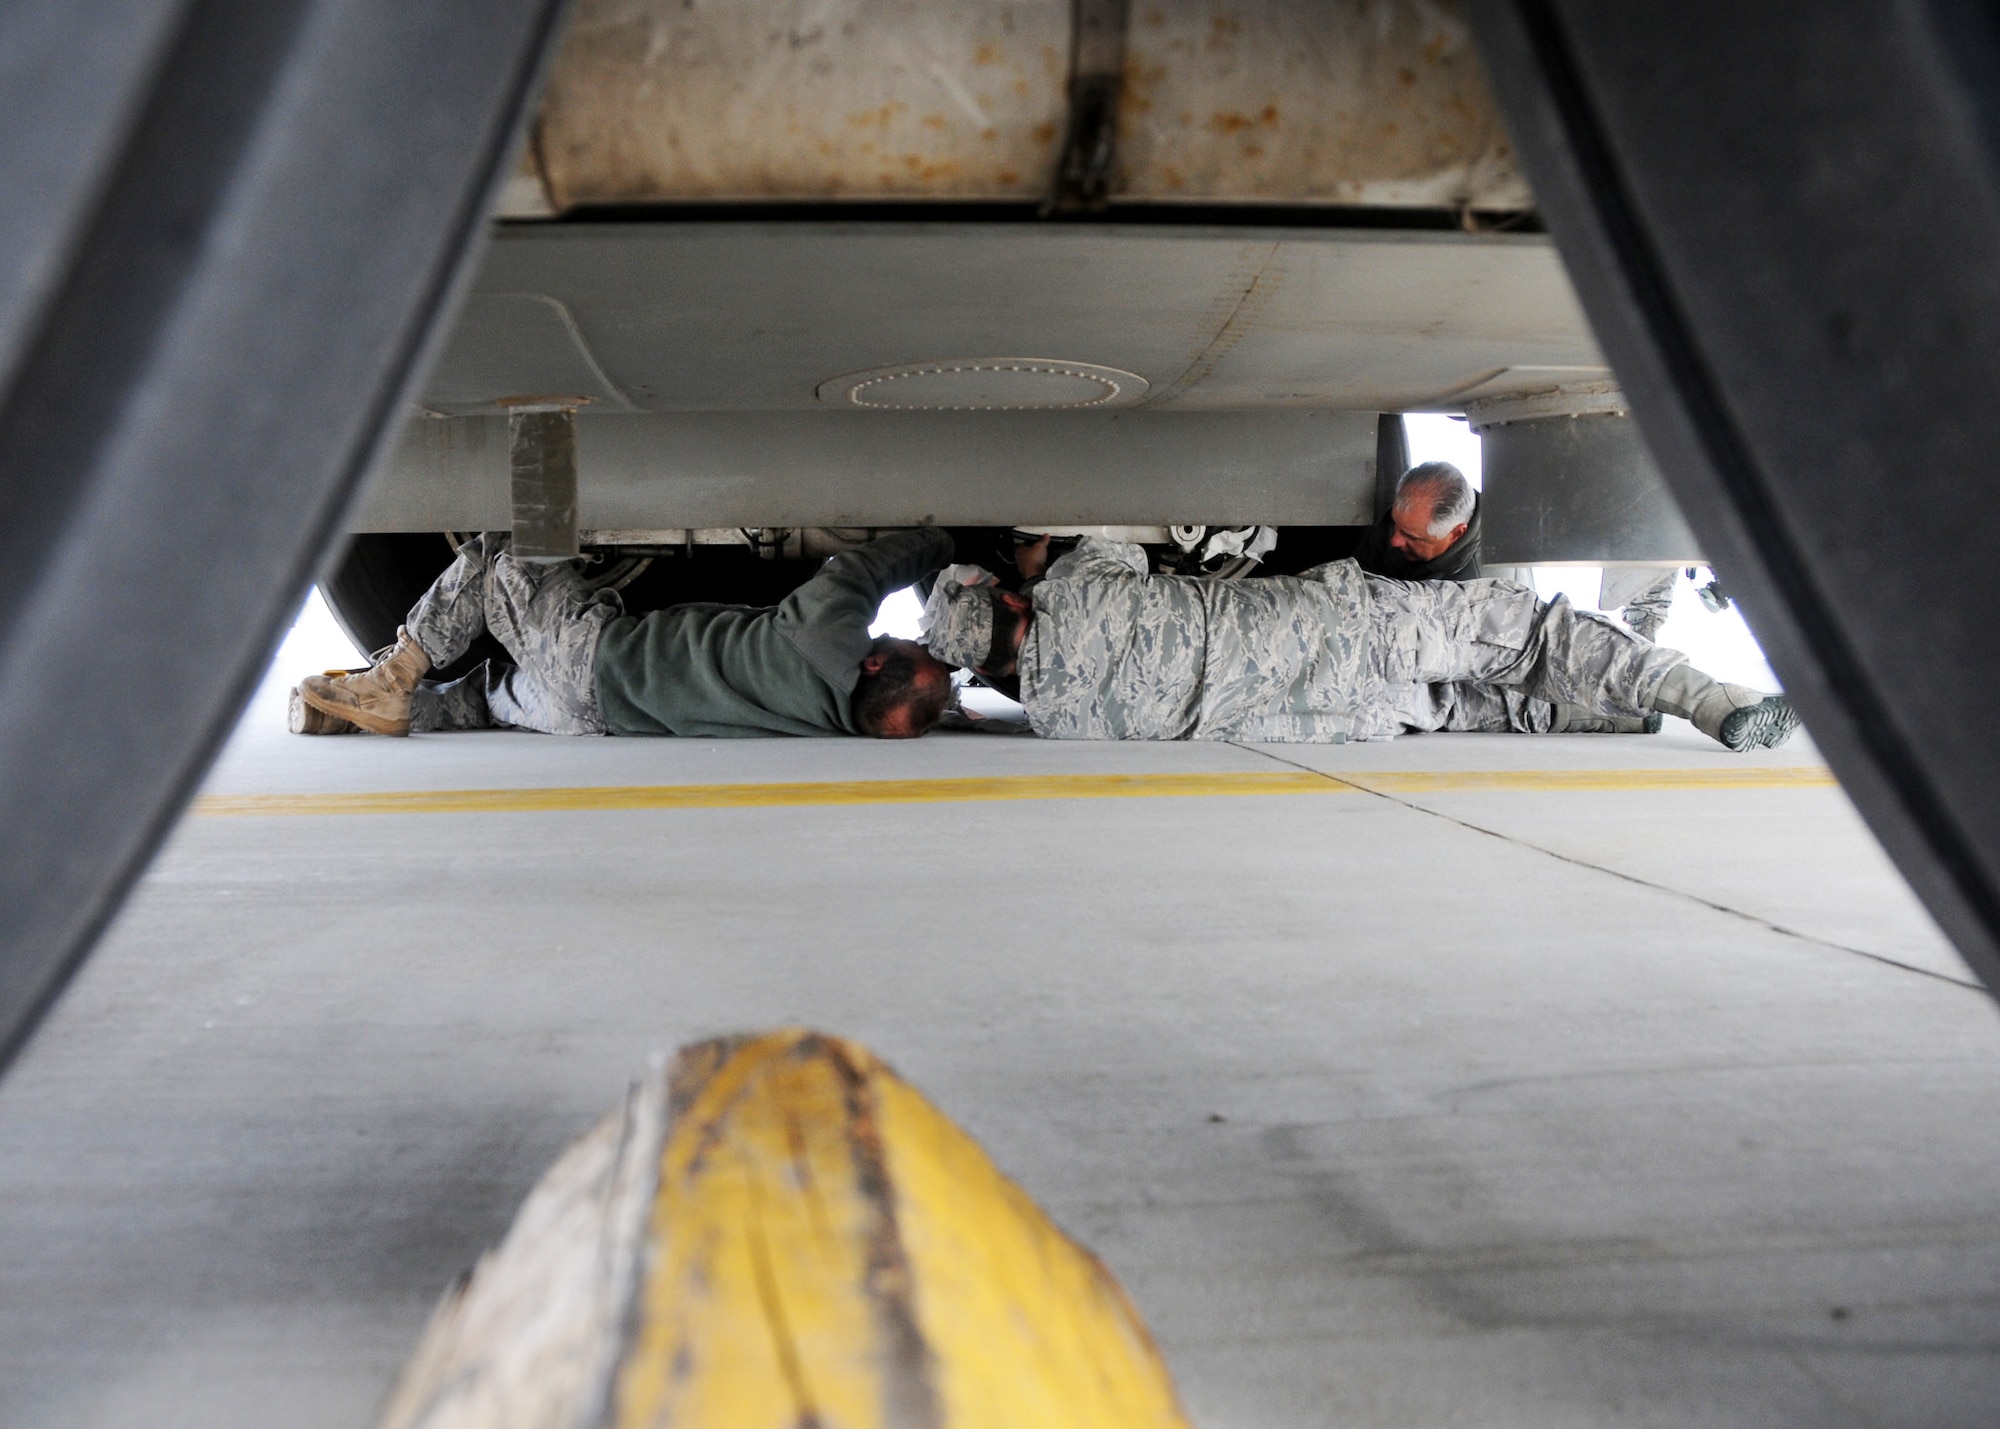 Maintainers from the 919th Special Operations Wing work on a hydraulic leak on MC-130E Combat Talon #555 prior to its final flight May 5 from Gowen Field, Idaho.  919th maintainers were sent to Boise, Idaho, to prepare four Talons to take off for one more mission – a flight into retirement and decommissioning.  Three of the Talons flew to Davis-Monthan Air Force Base, Ariz.  The other went to Hurlburt Field, Fla., to be placed in the Air Force Special Operations Command airpark.  (U.S. Air Force photo/Tech. Sgt. Samuel King Jr.) 